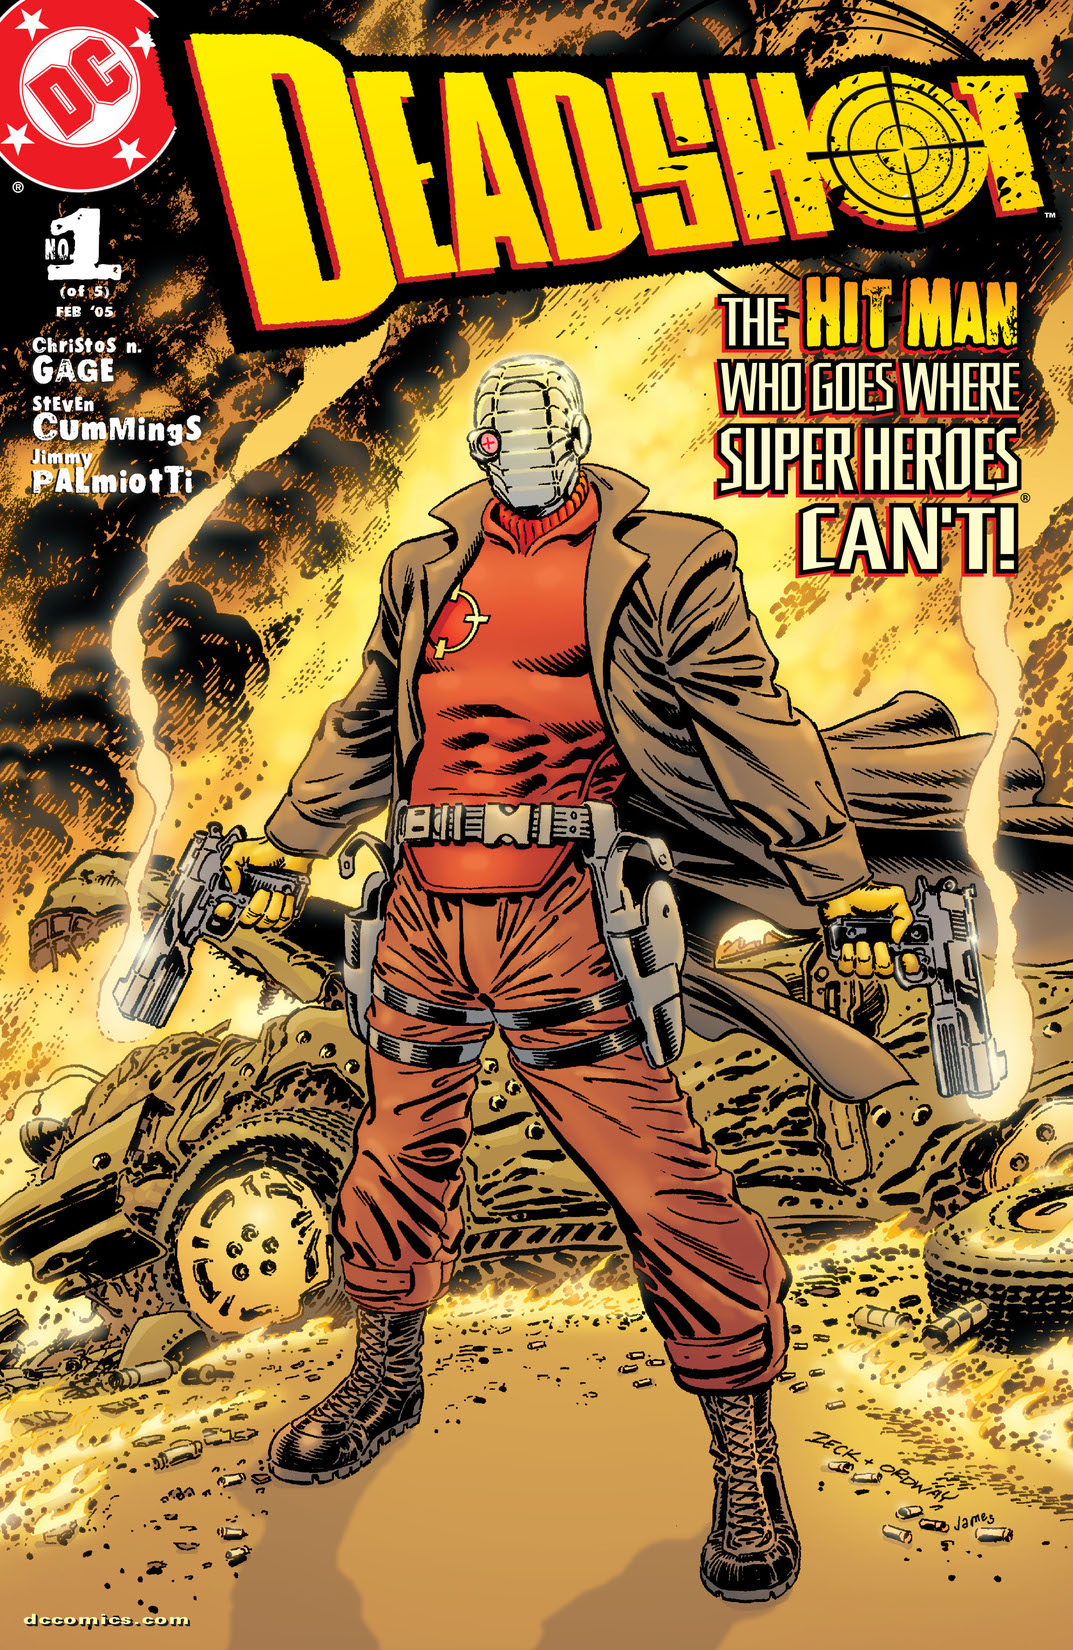 Deadshot (2004-) #1 preview images